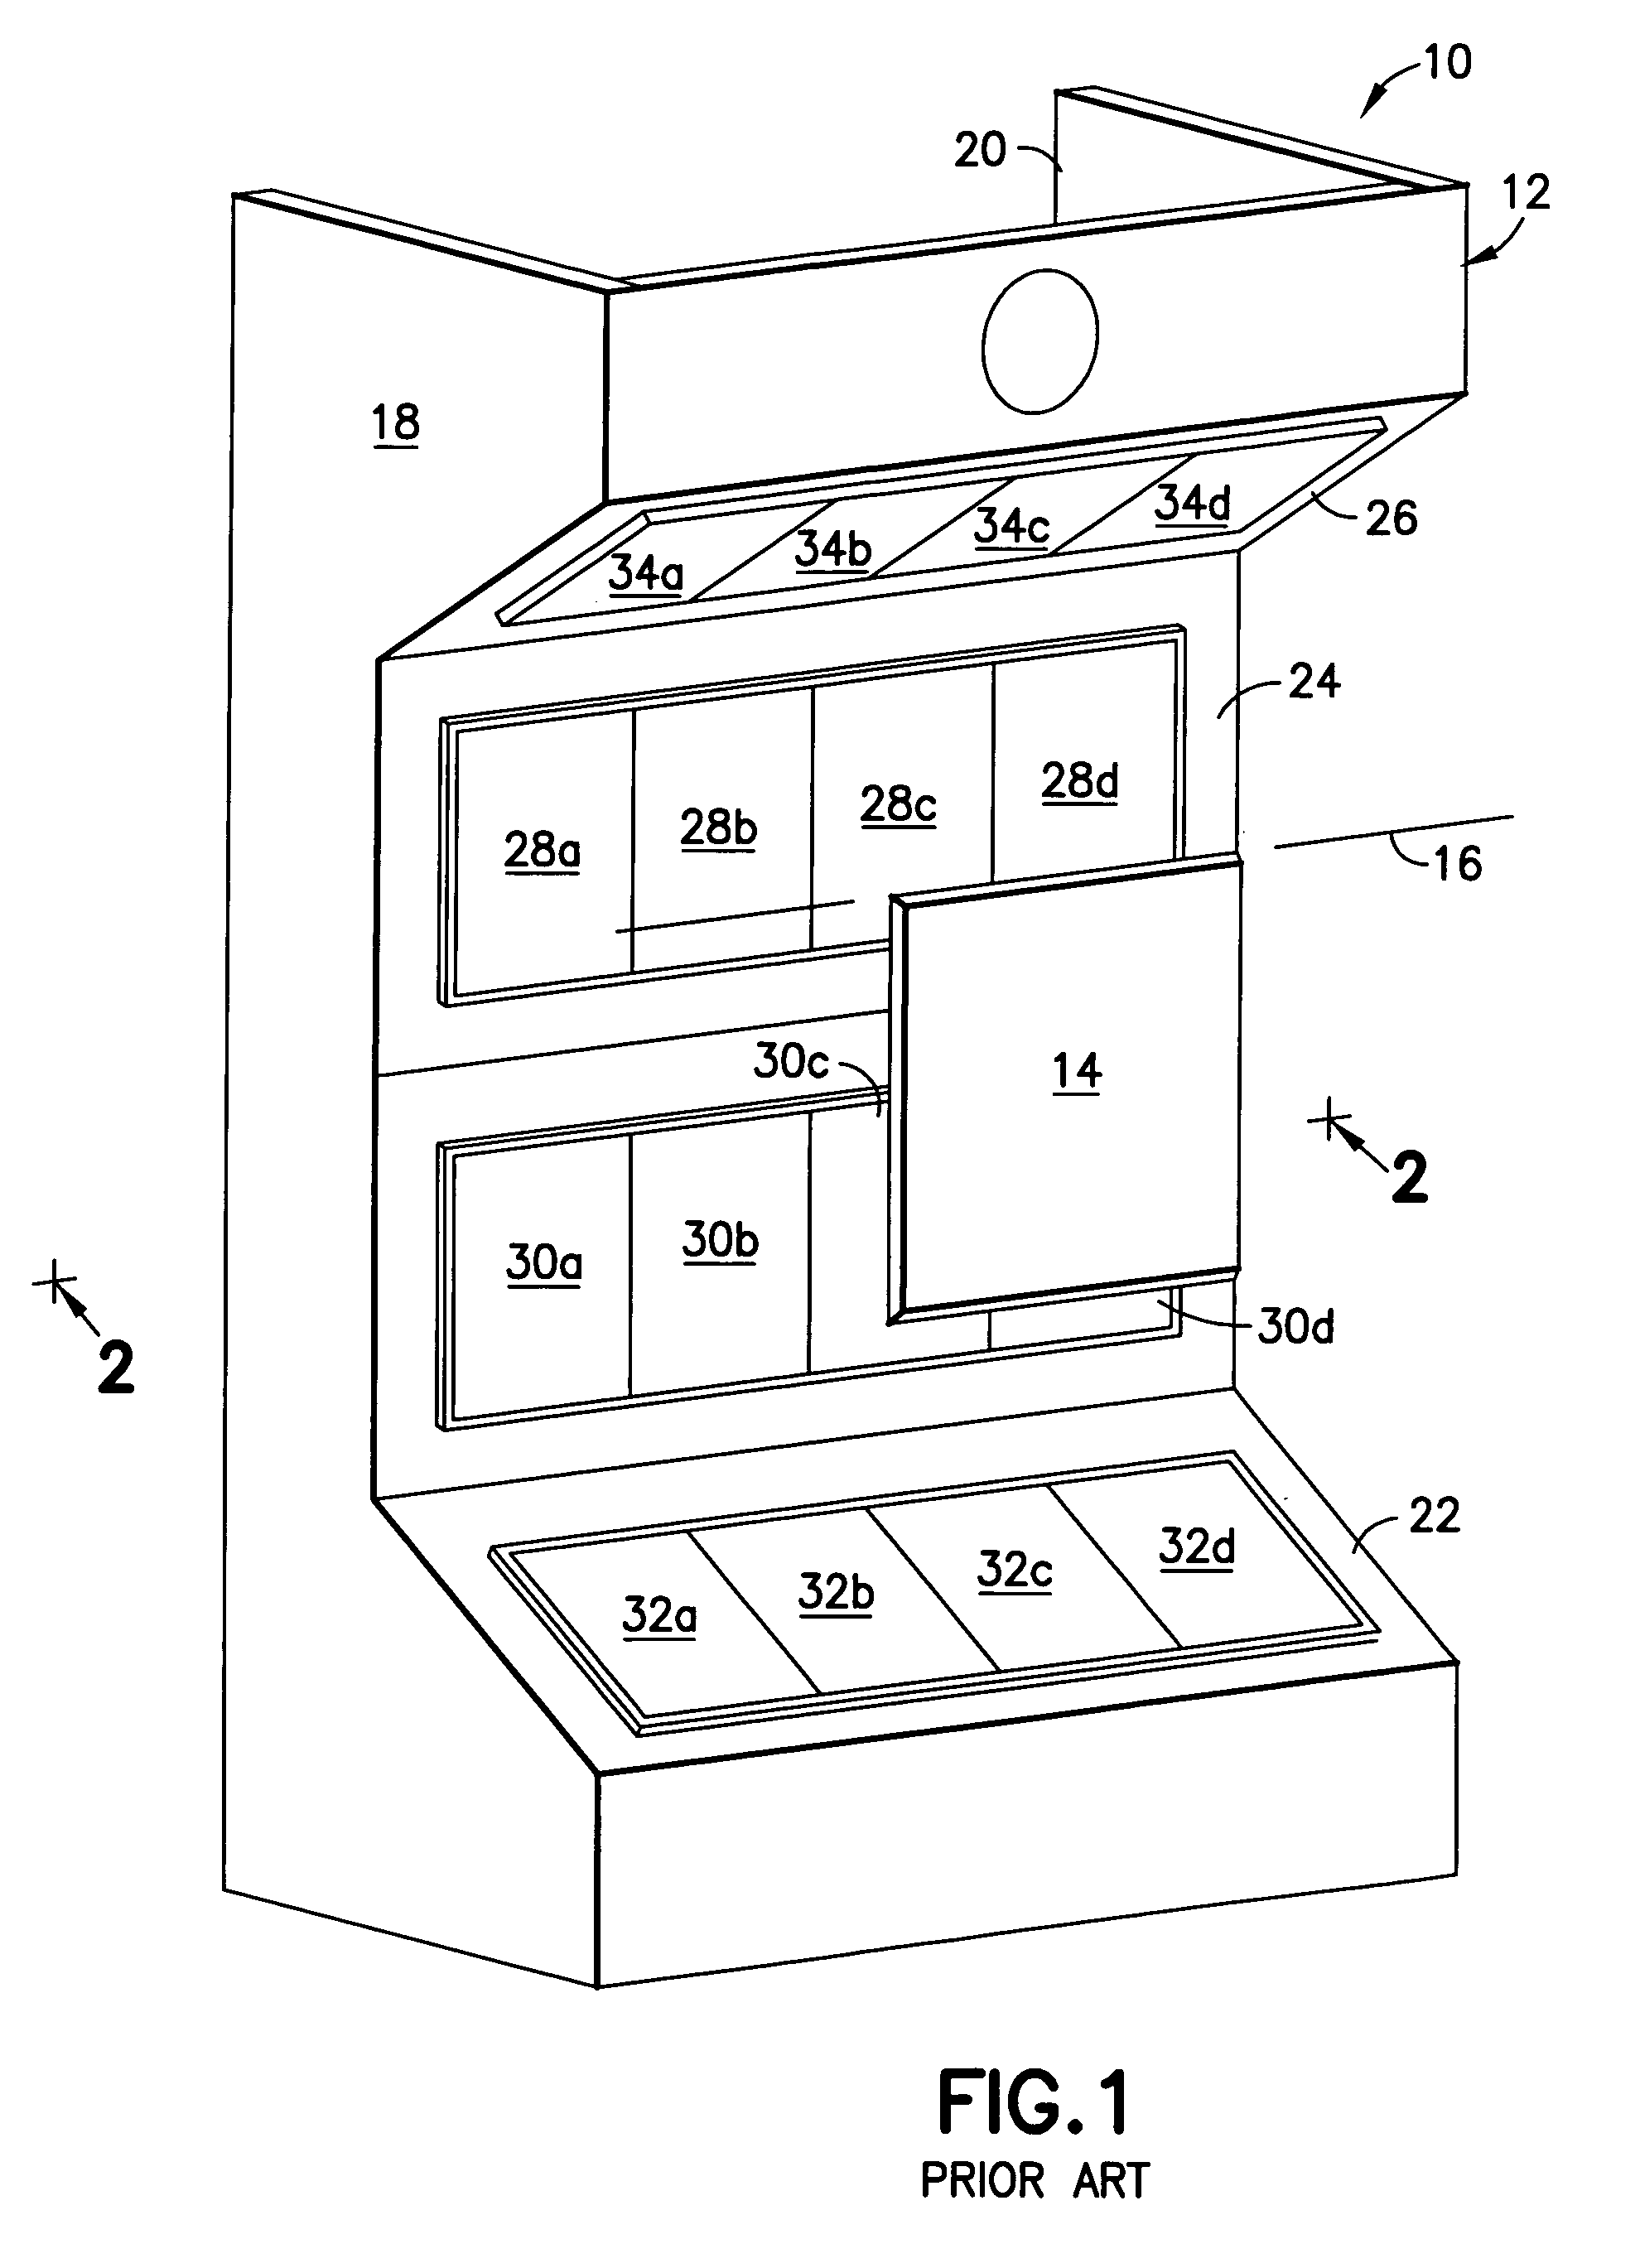 Apparatus for heating and curing powder coatings on porous wood products